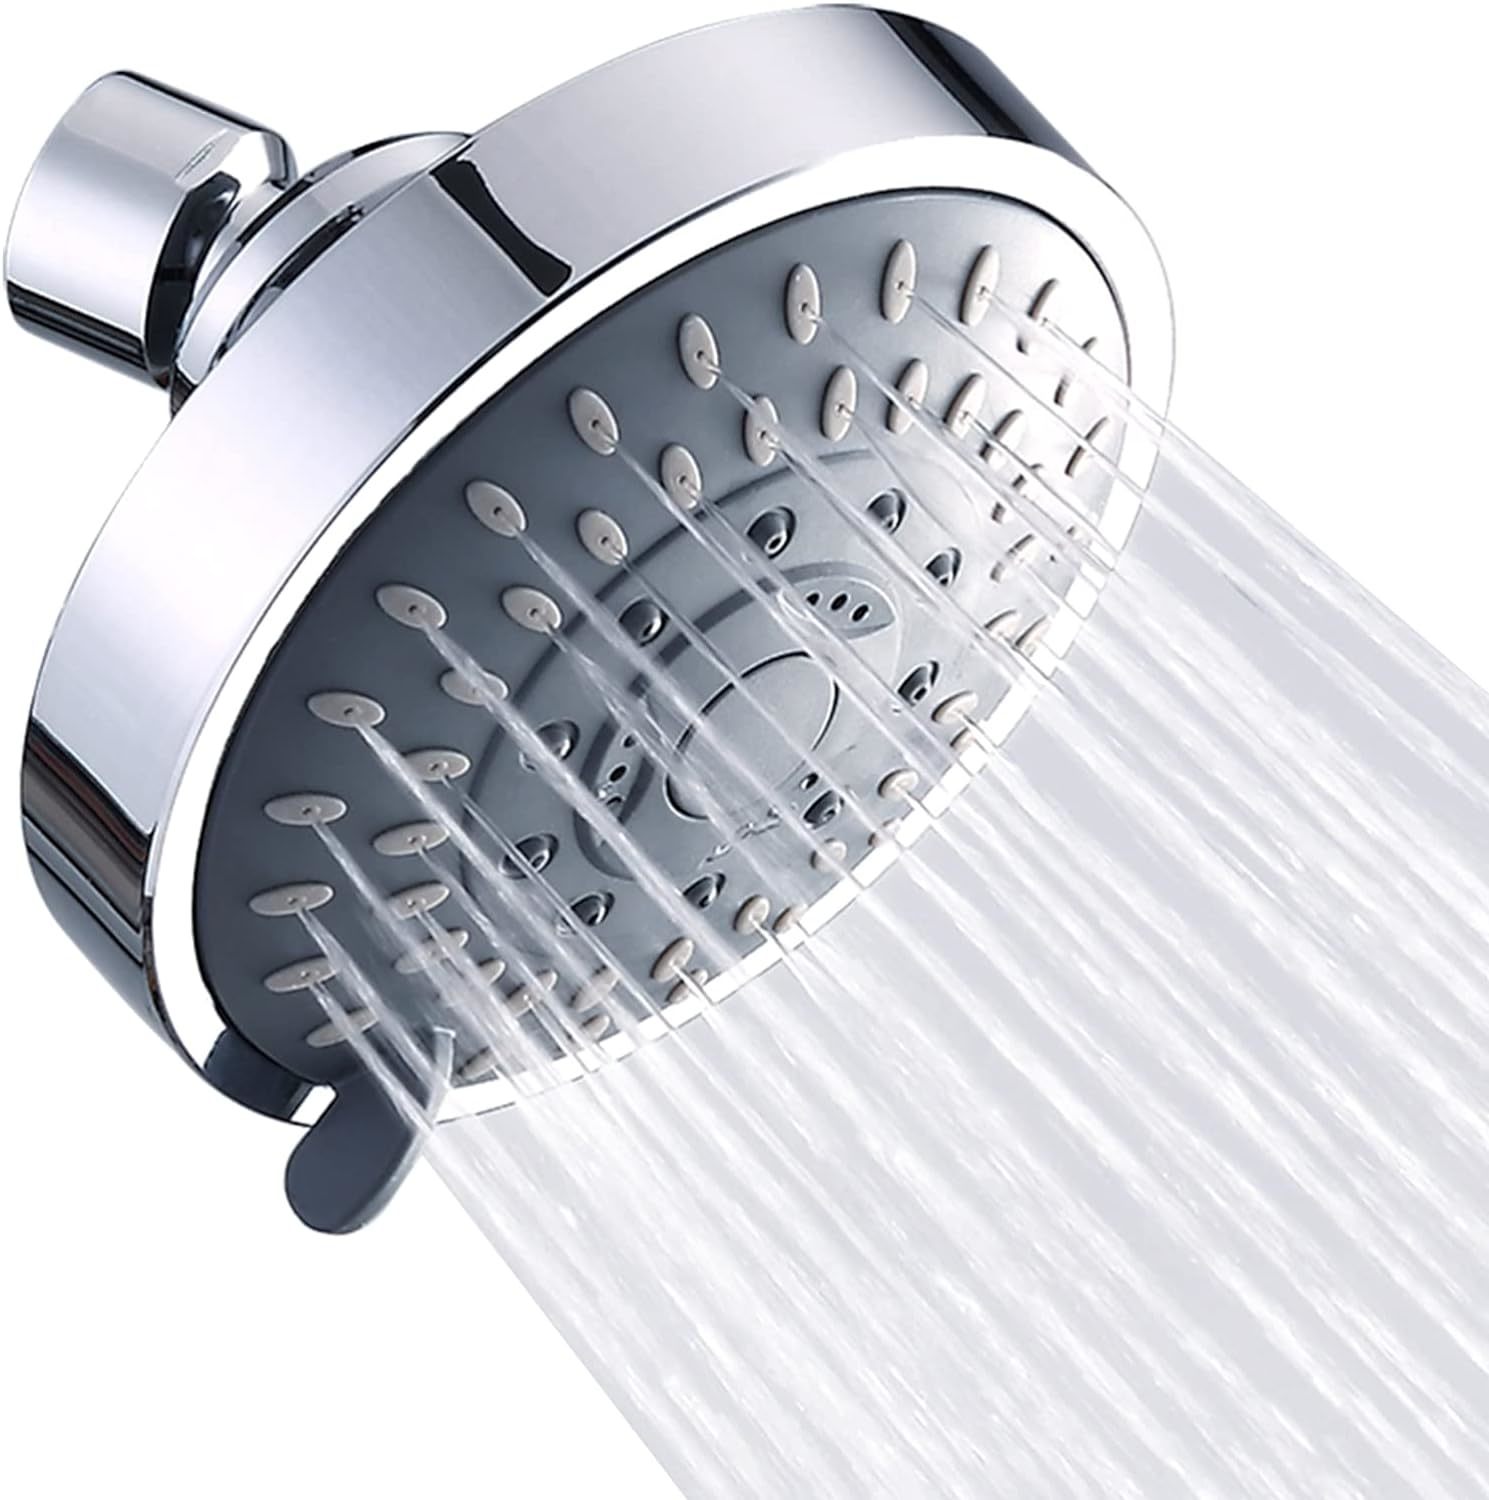 Primary image for Briout Shower Head, High Pressure Shower Heads 4.1 Inch 5 Settings Rain, Chrome